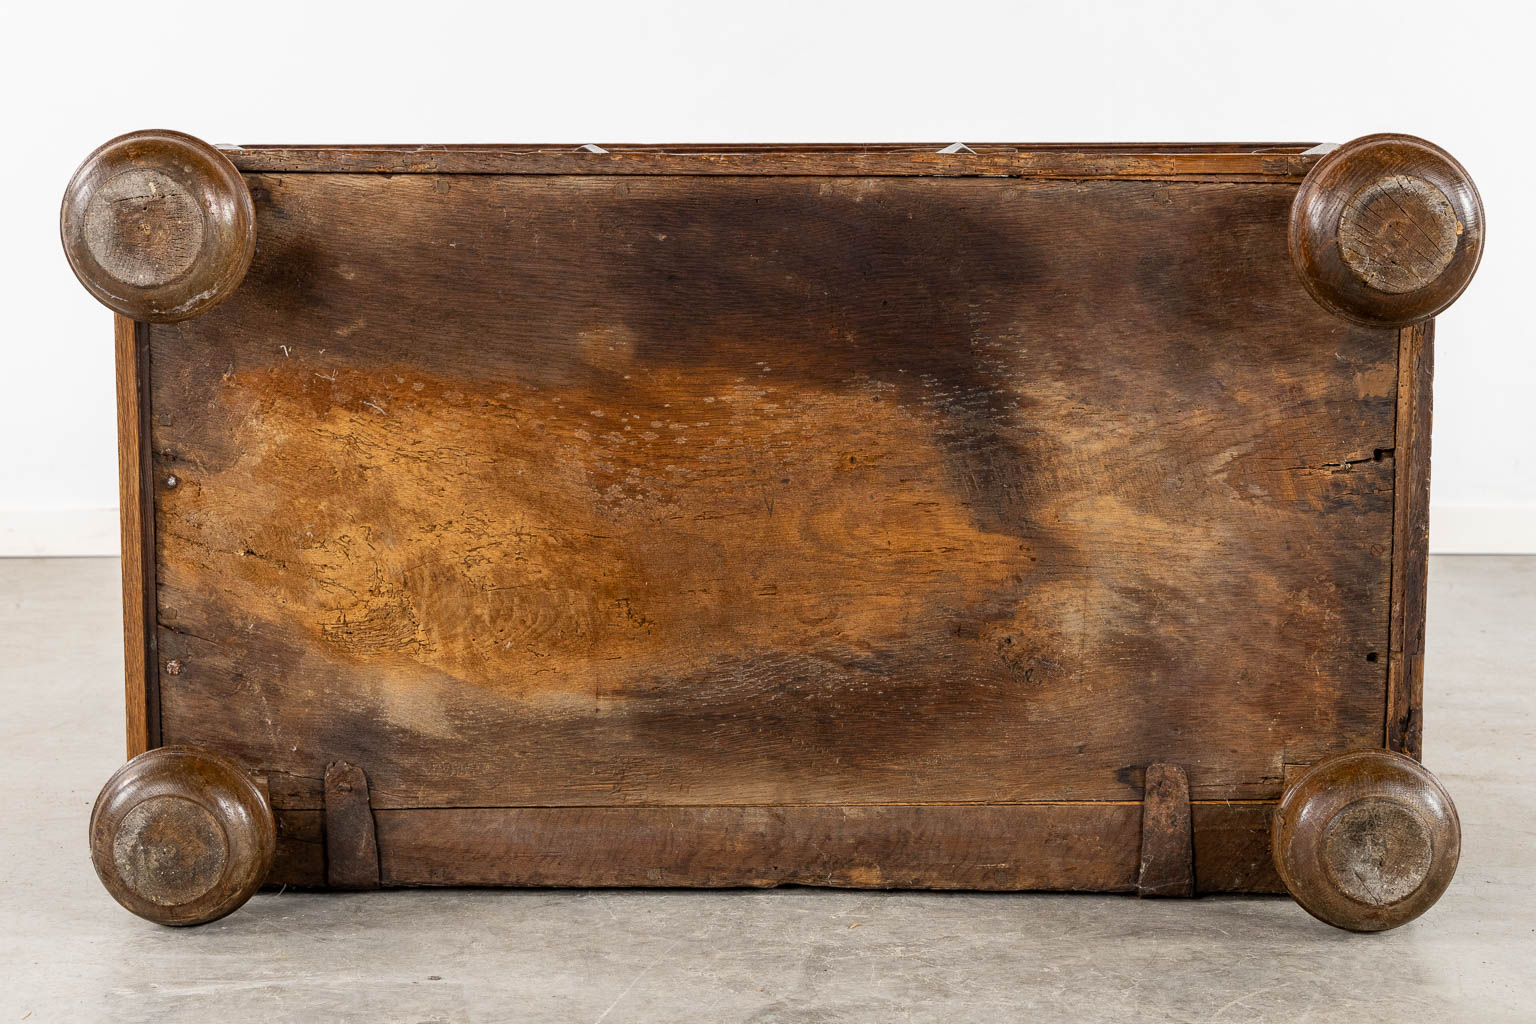 An antique chest mounted with wrought-iron, The Netherlands, 17th C. (L:57 x W:97 x H:56 cm) - Image 7 of 11